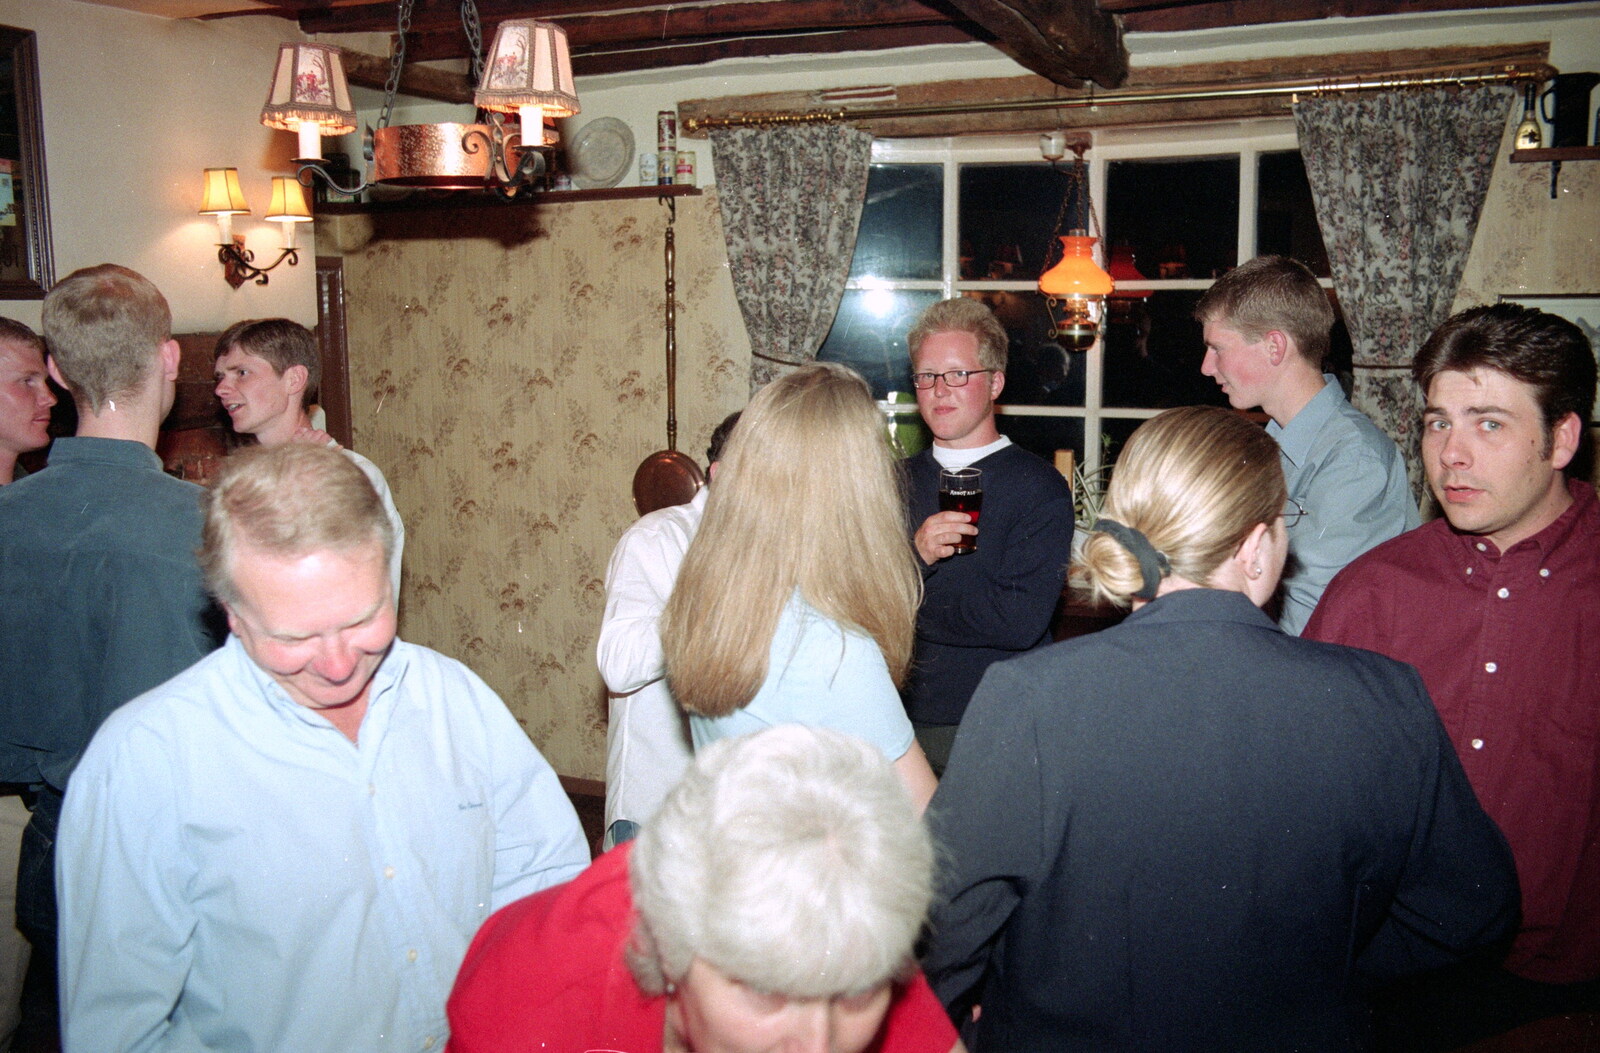 Hermann looks over from Wavy's Thirtieth Birthday, The Swan Inn, Brome, Suffolk - 24th May 2000